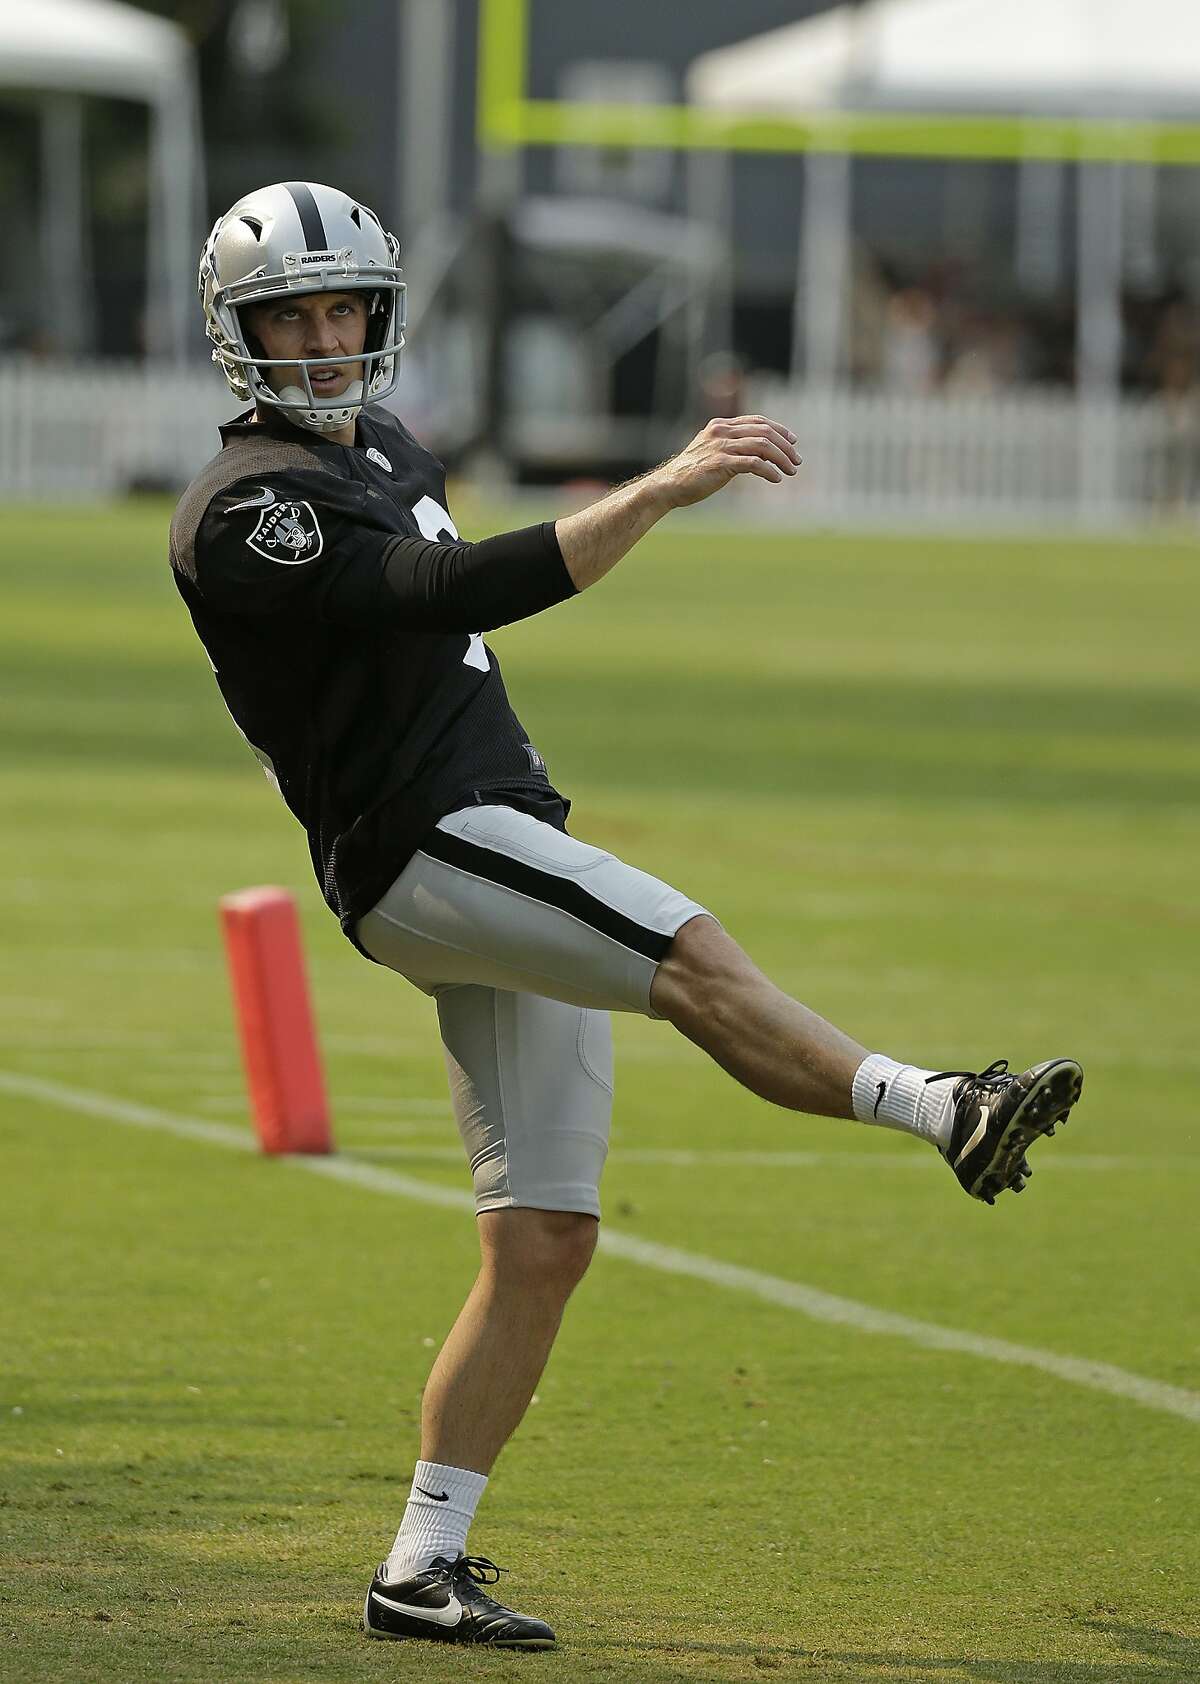 Oakland Raiders kicker Mike Nugent warms up during NFL football practice Tuesday, Aug. 7, 2018, in Napa, Calif. The Raiders and the Detroit Lions held a joint practice Tuesday before their upcoming preseason game on Friday. (AP Photo/Eric Risberg)